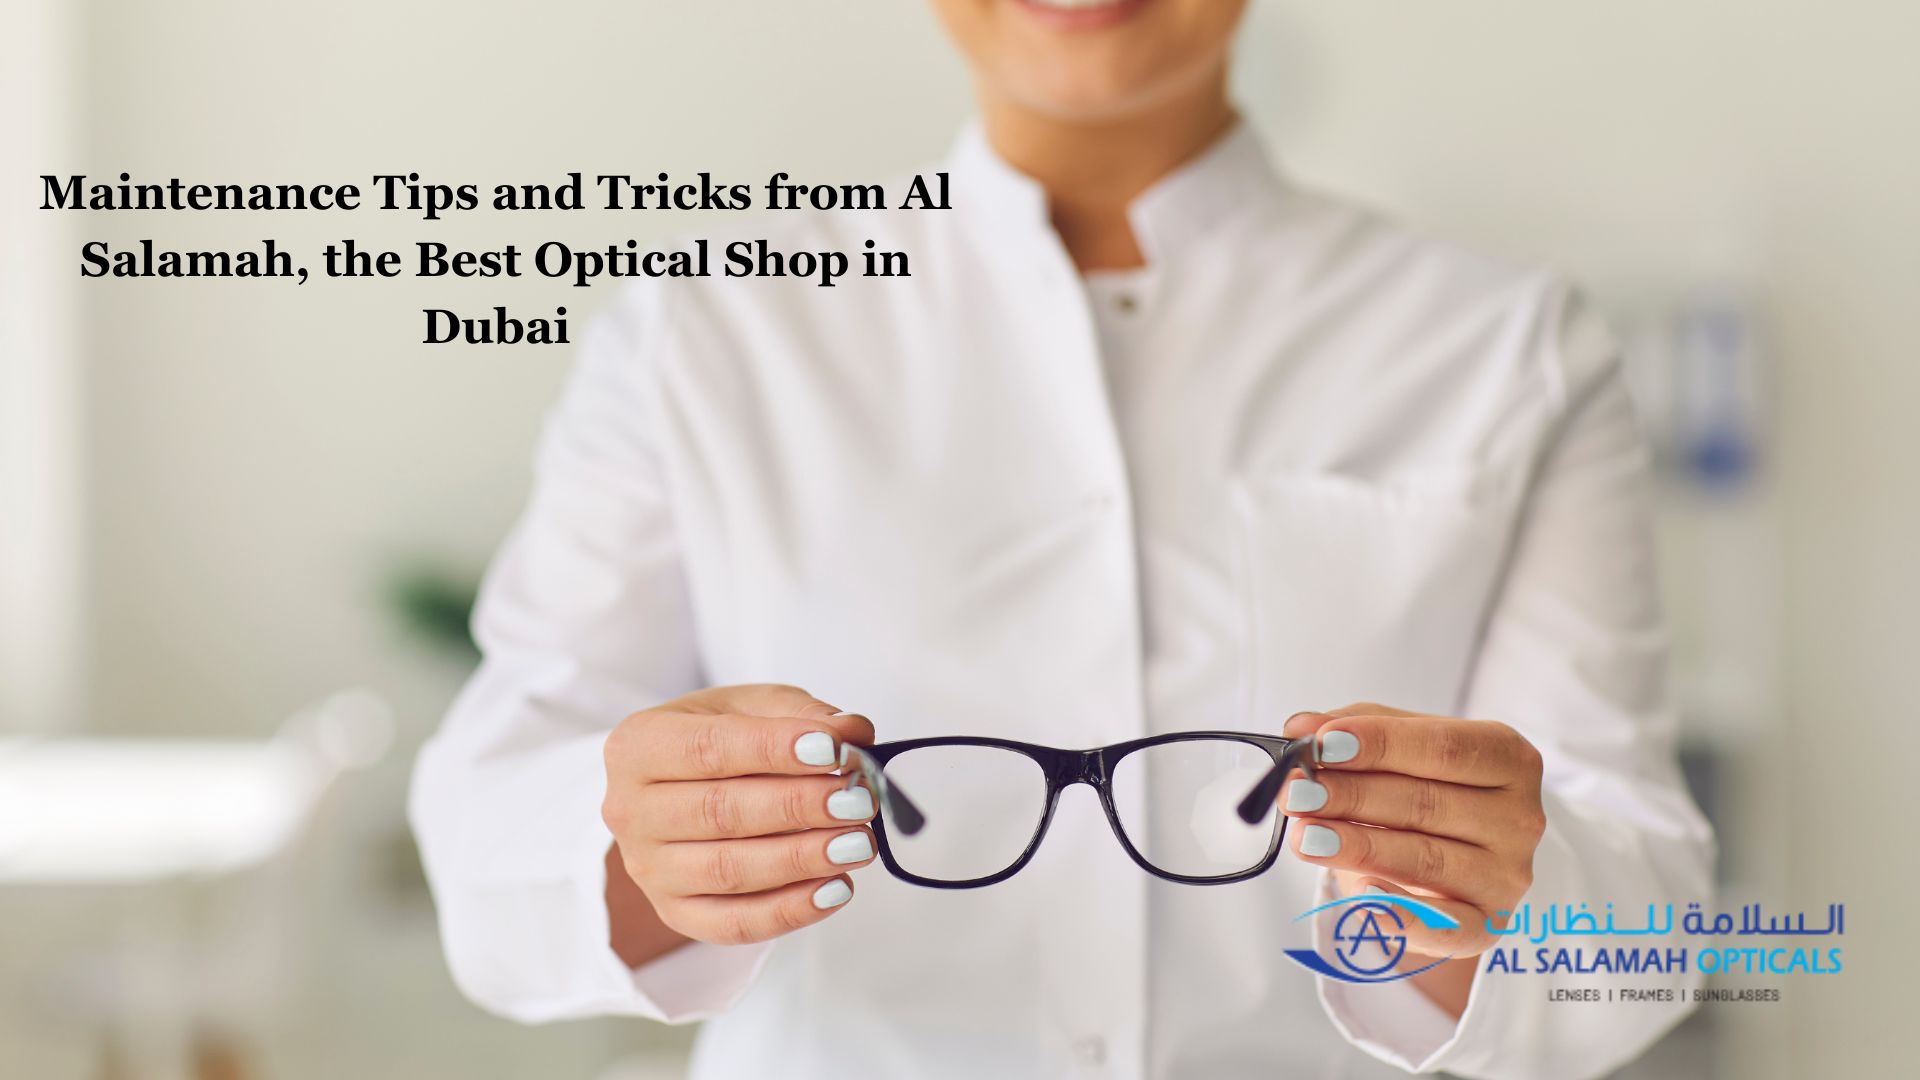 Maintenance Tips and Tricks from Al Salamah, the Best Optical Shop in Dubai